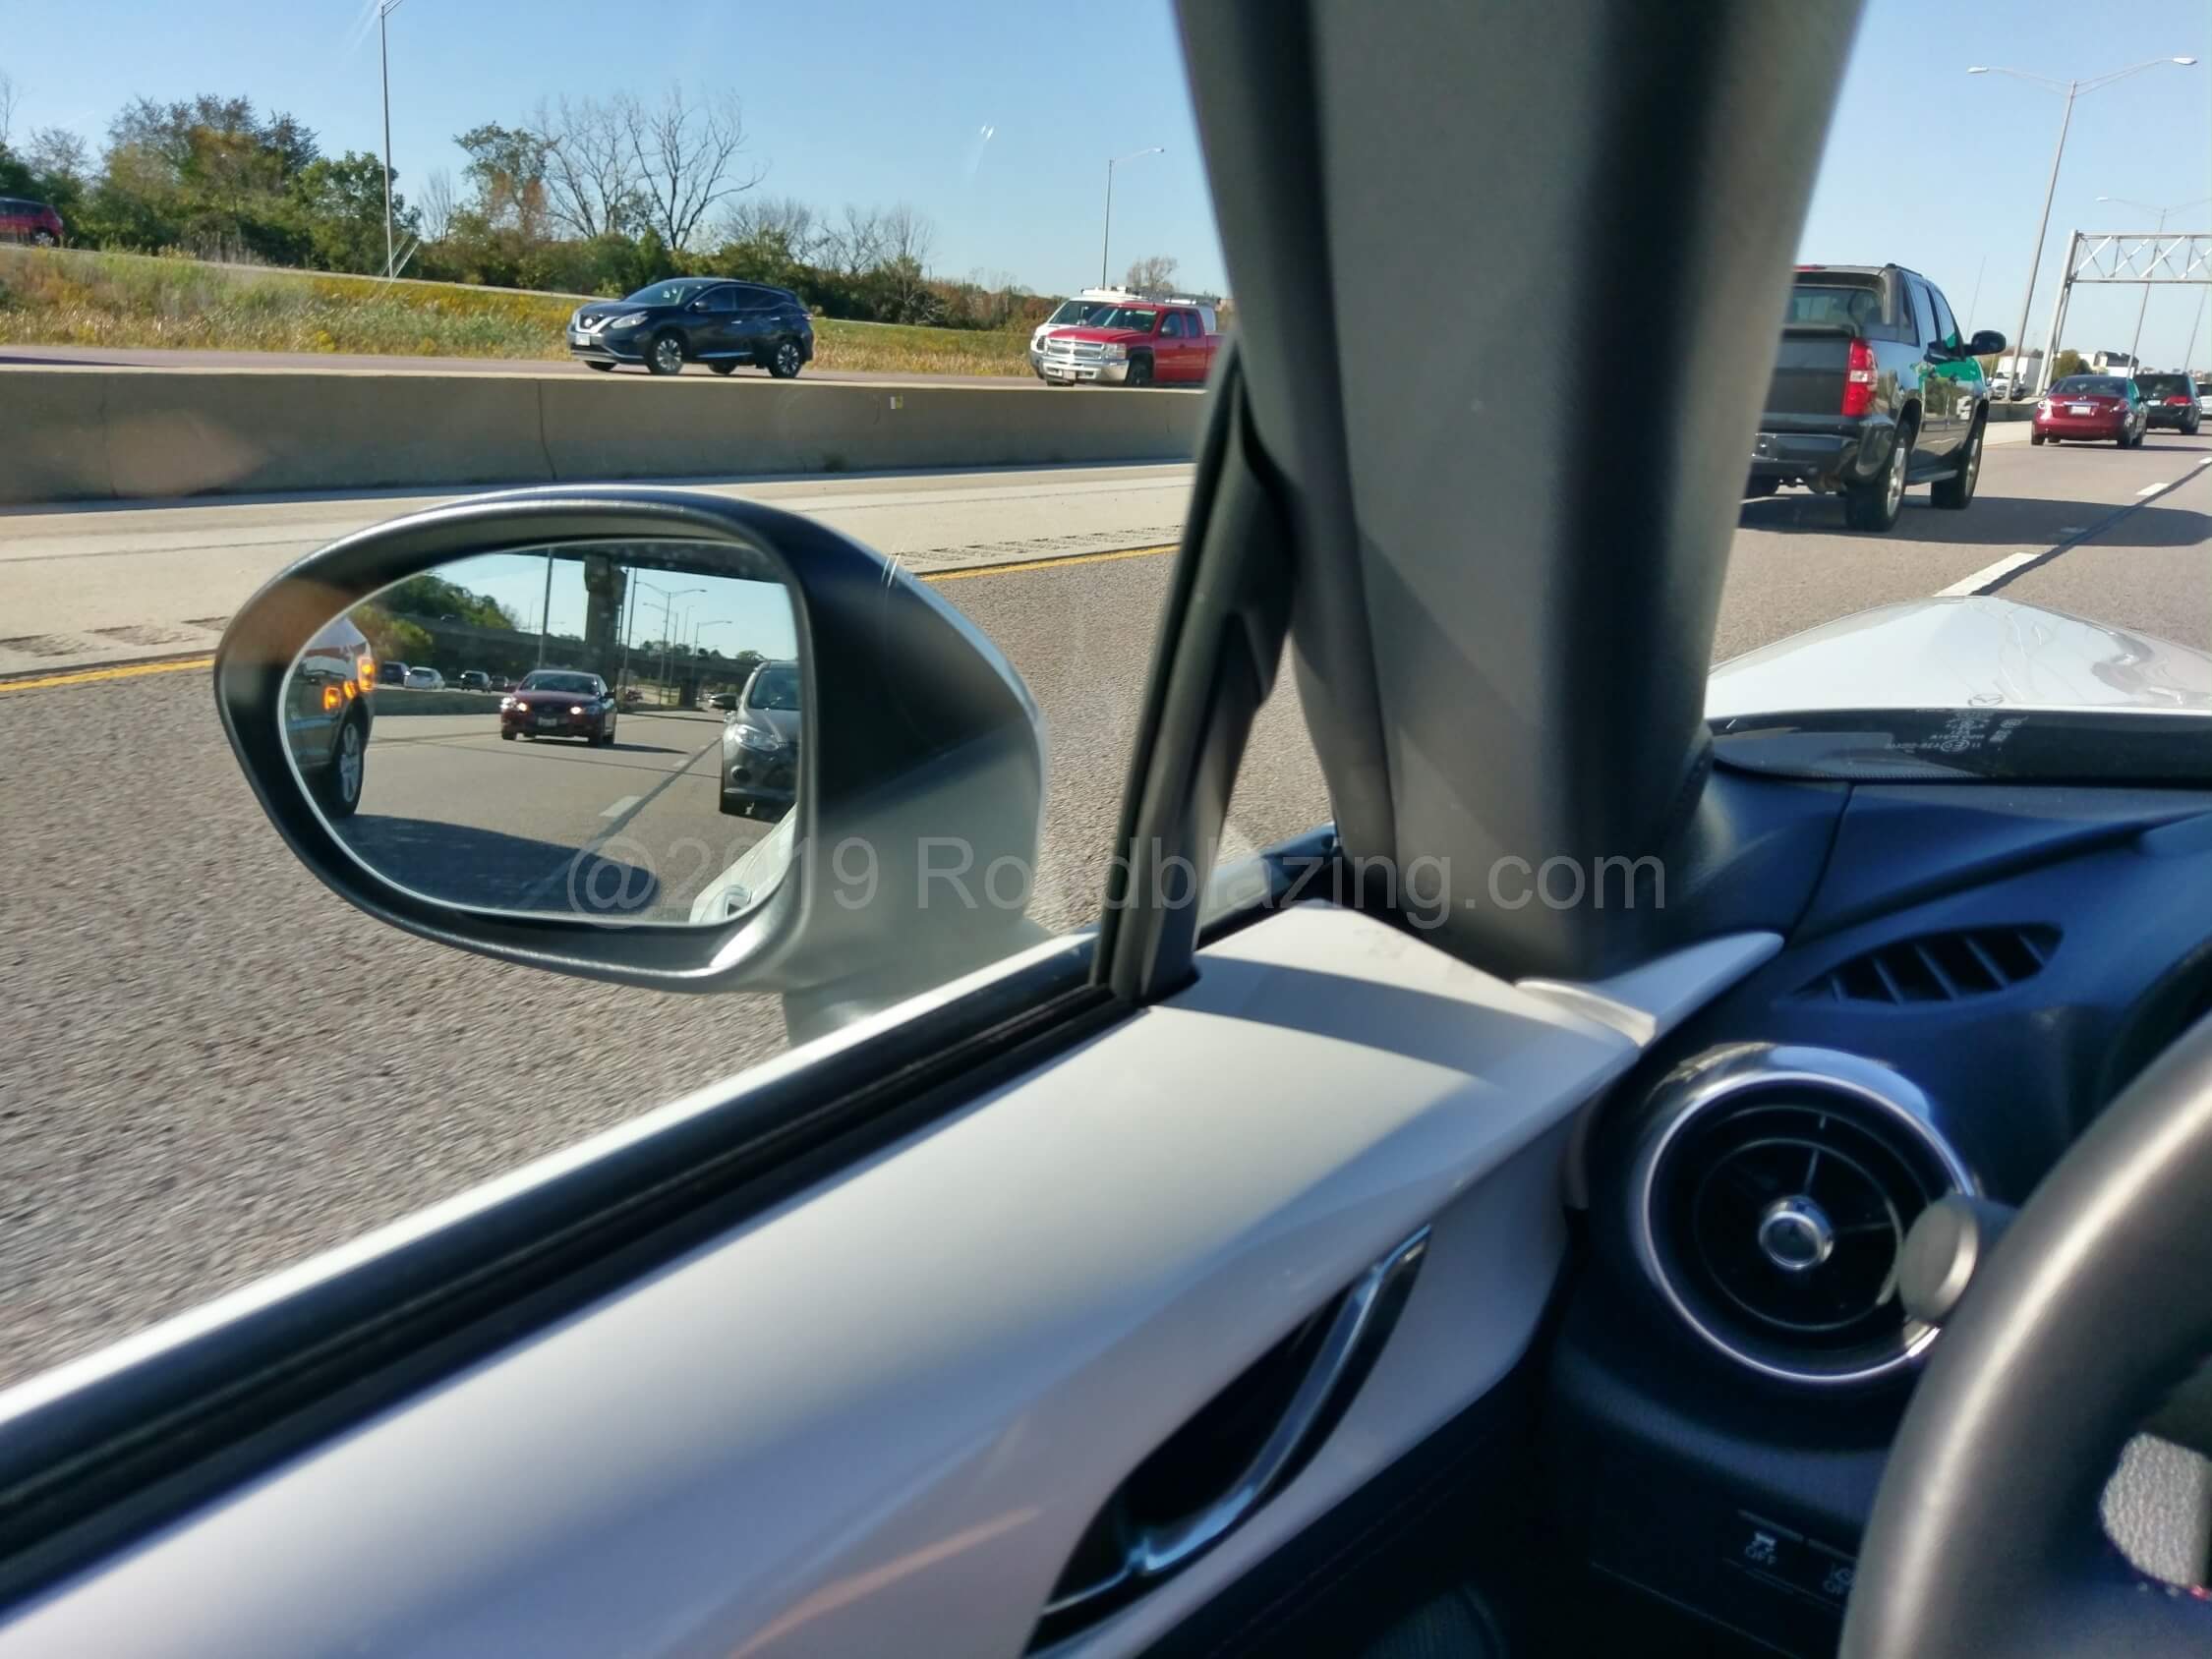 2019 Mazda MX-5 Grand Touring: Blind Spot Warning, part of the i-Activesense driver assist suite